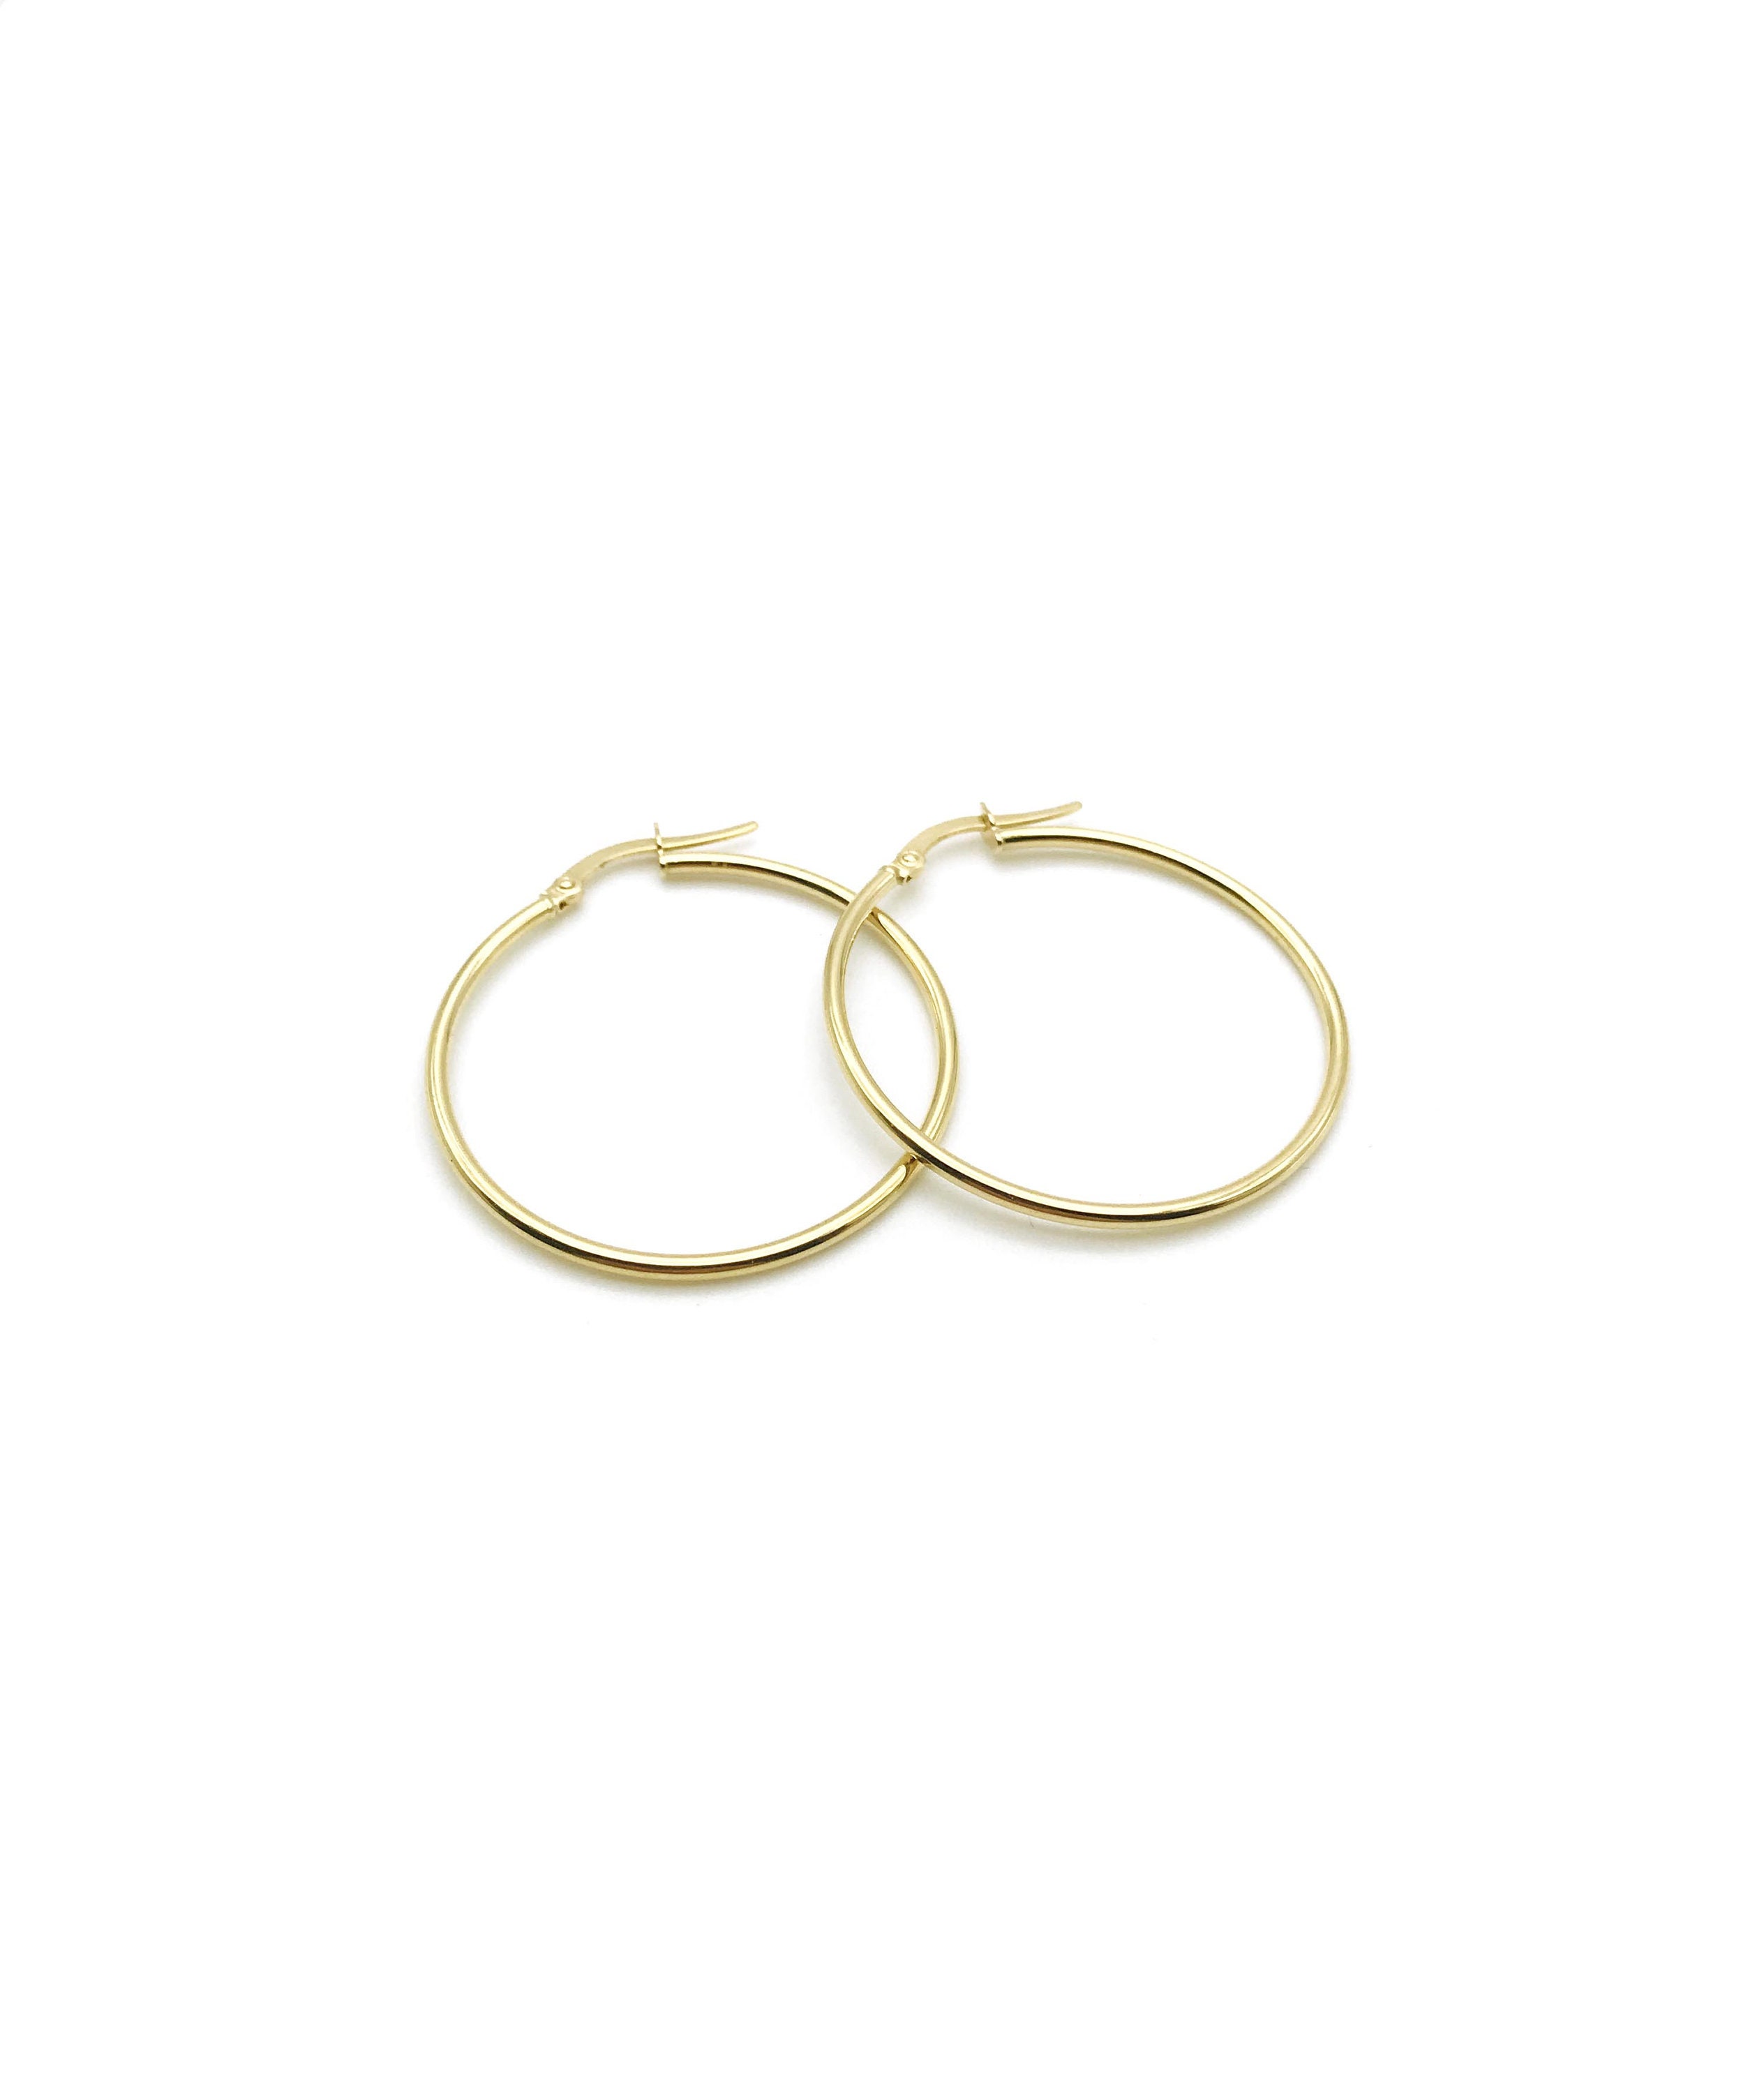 18K Yellow Gold Hoop Earrings Nice Hoops Polished Minimalist Classic Thin Gift For Her Made in Italy